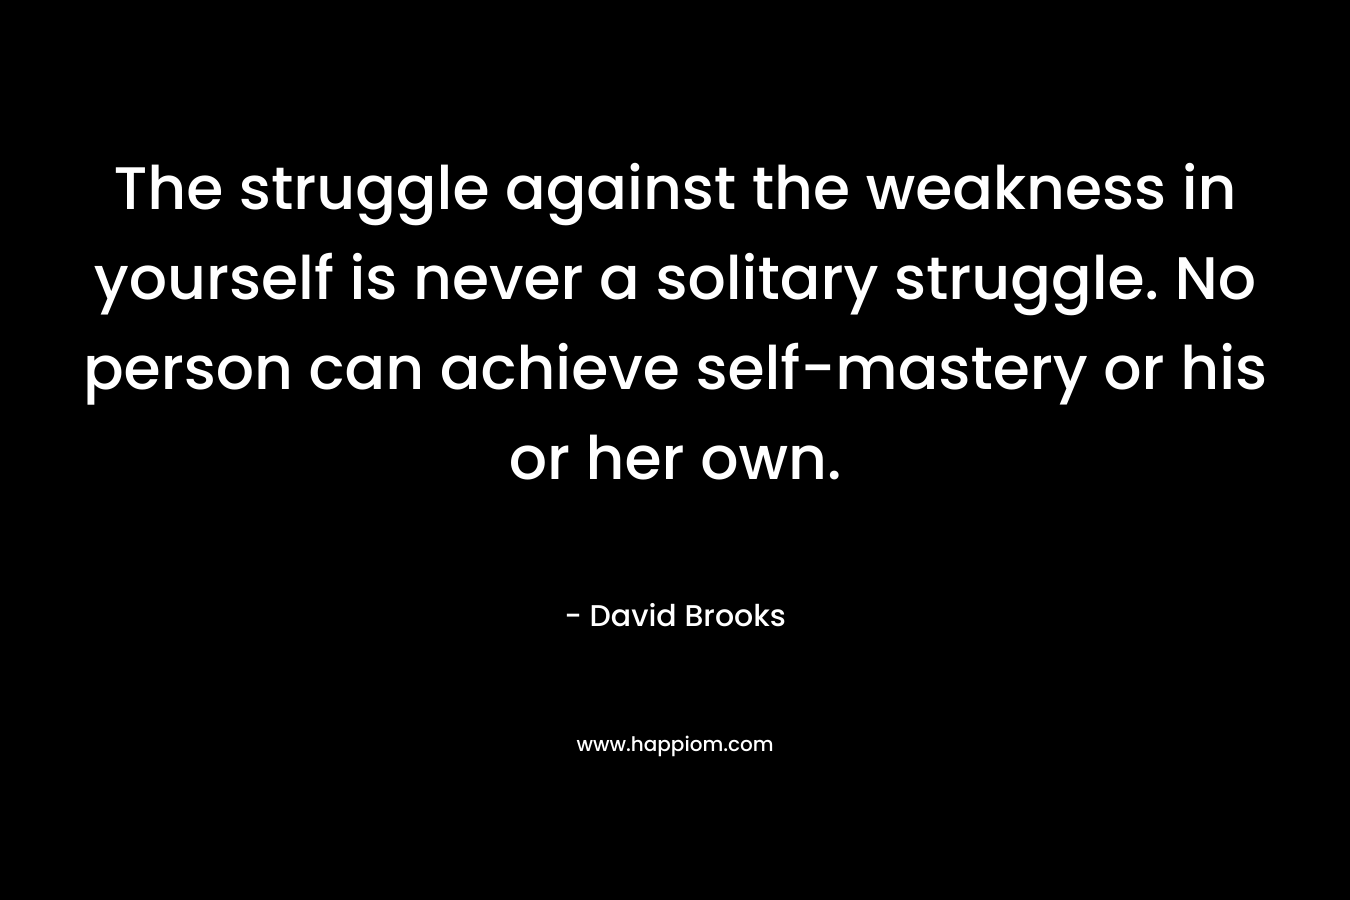 The struggle against the weakness in yourself is never a solitary struggle. No person can achieve self-mastery or his or her own.